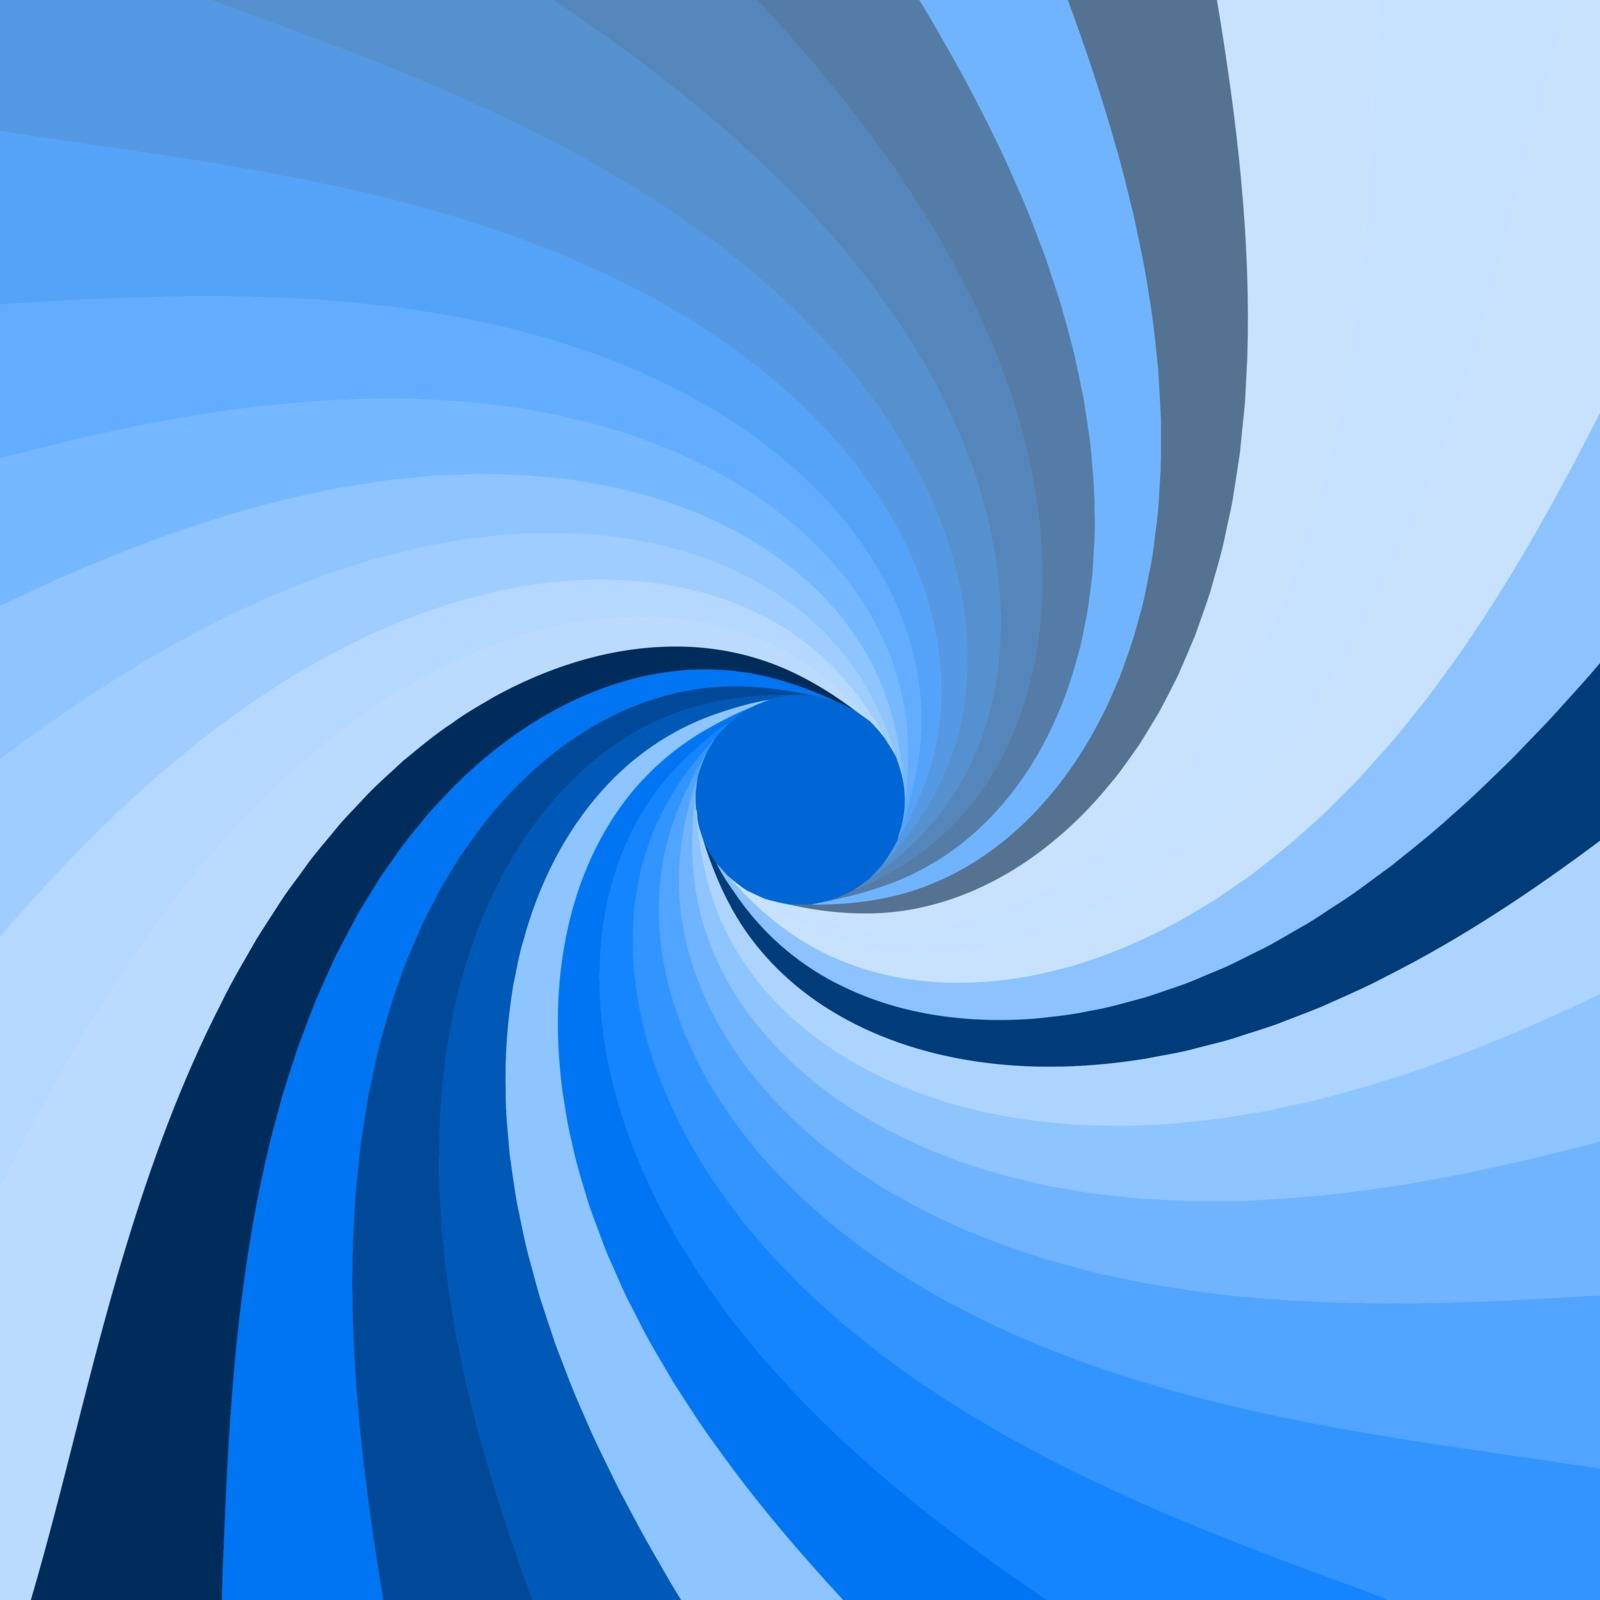 Abstract swirl background. Vector illustration. Can be used for wallpaper, web page background, web banners.